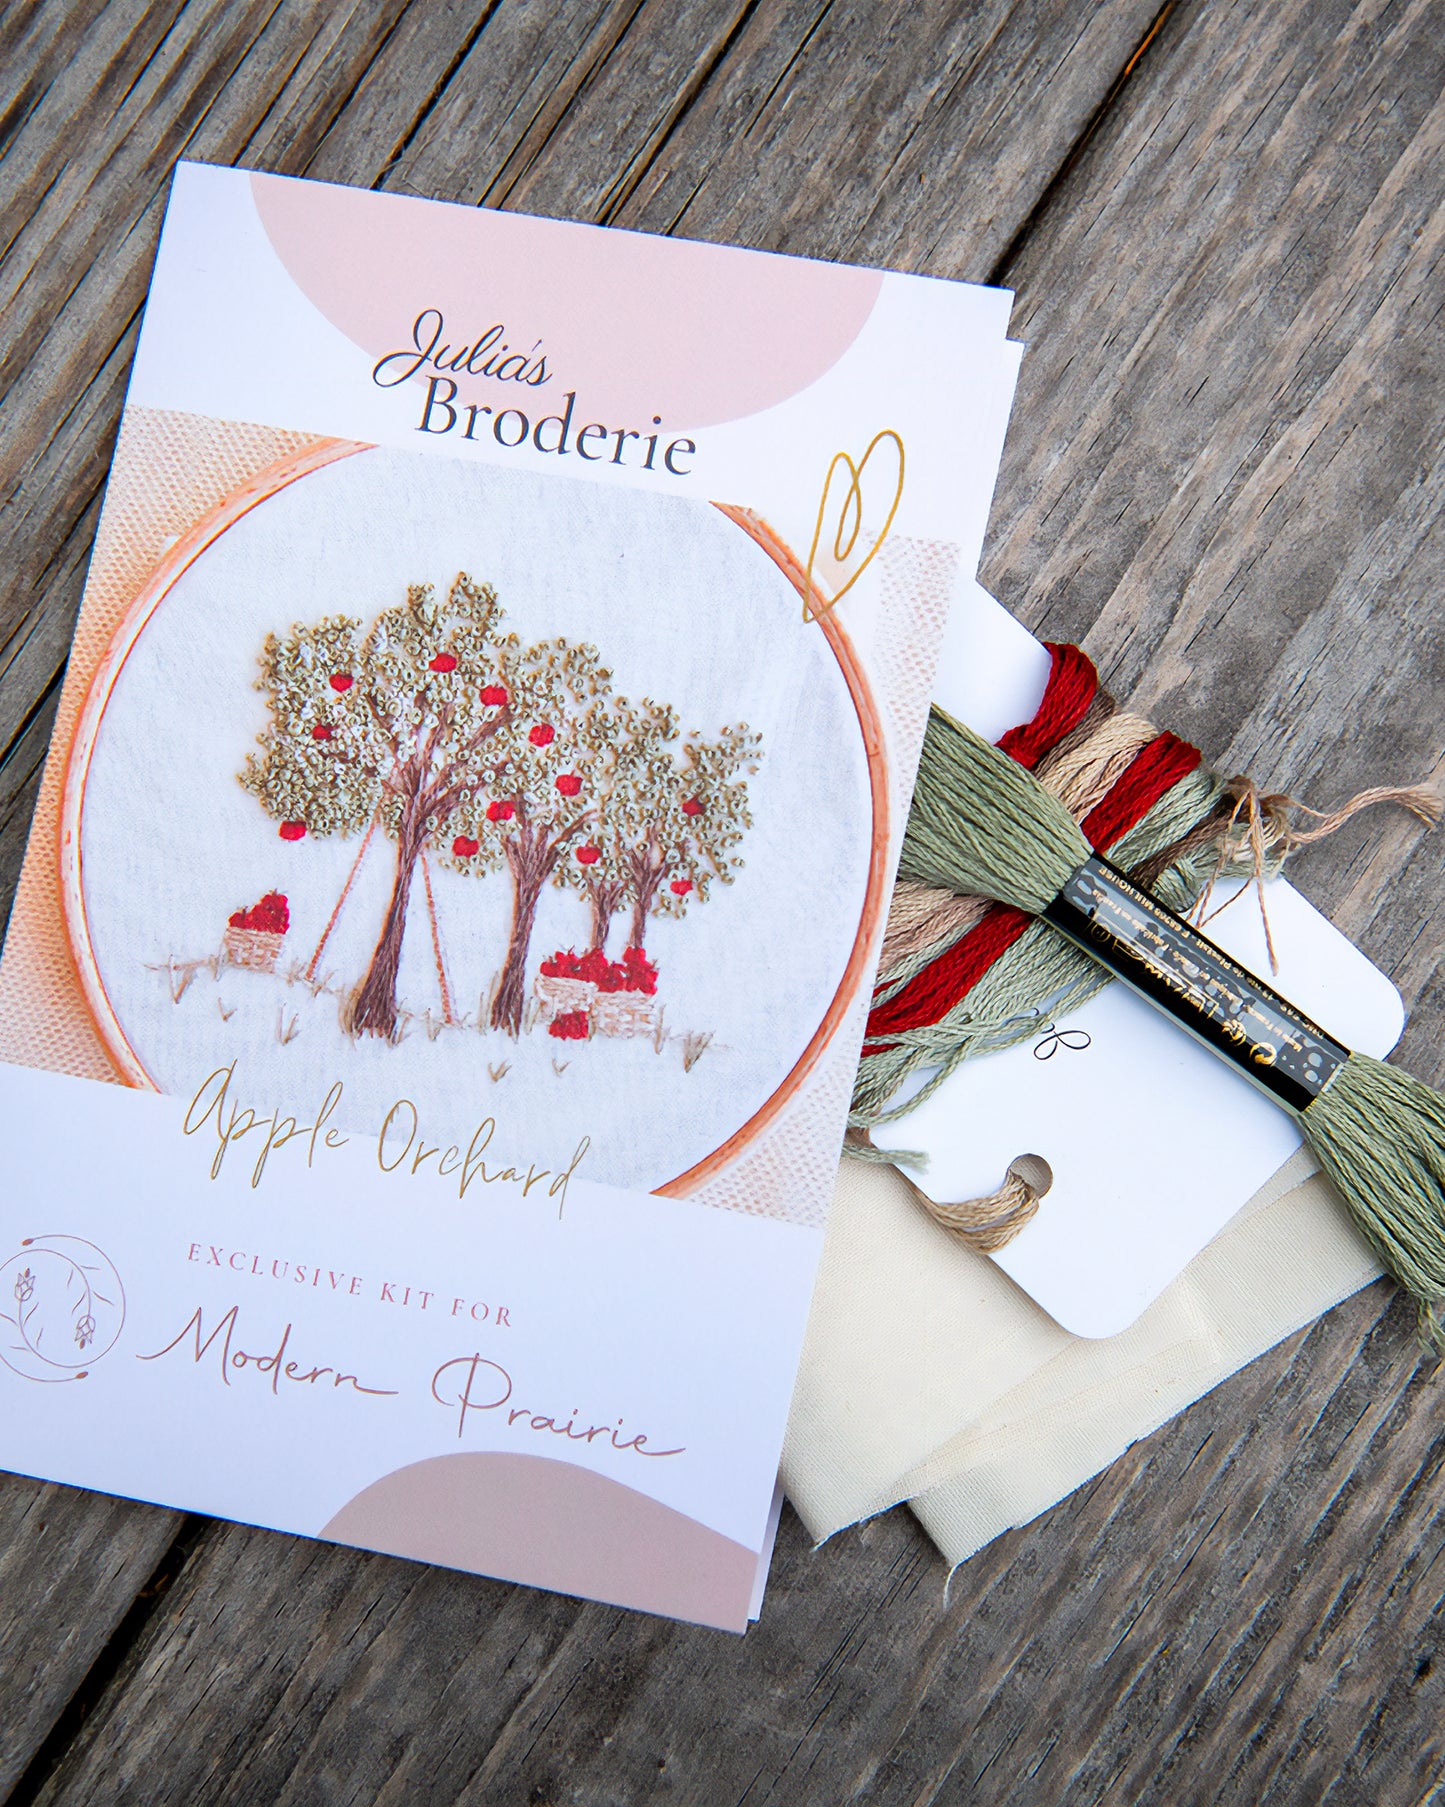 The Apple Orchard Embroidery Kit